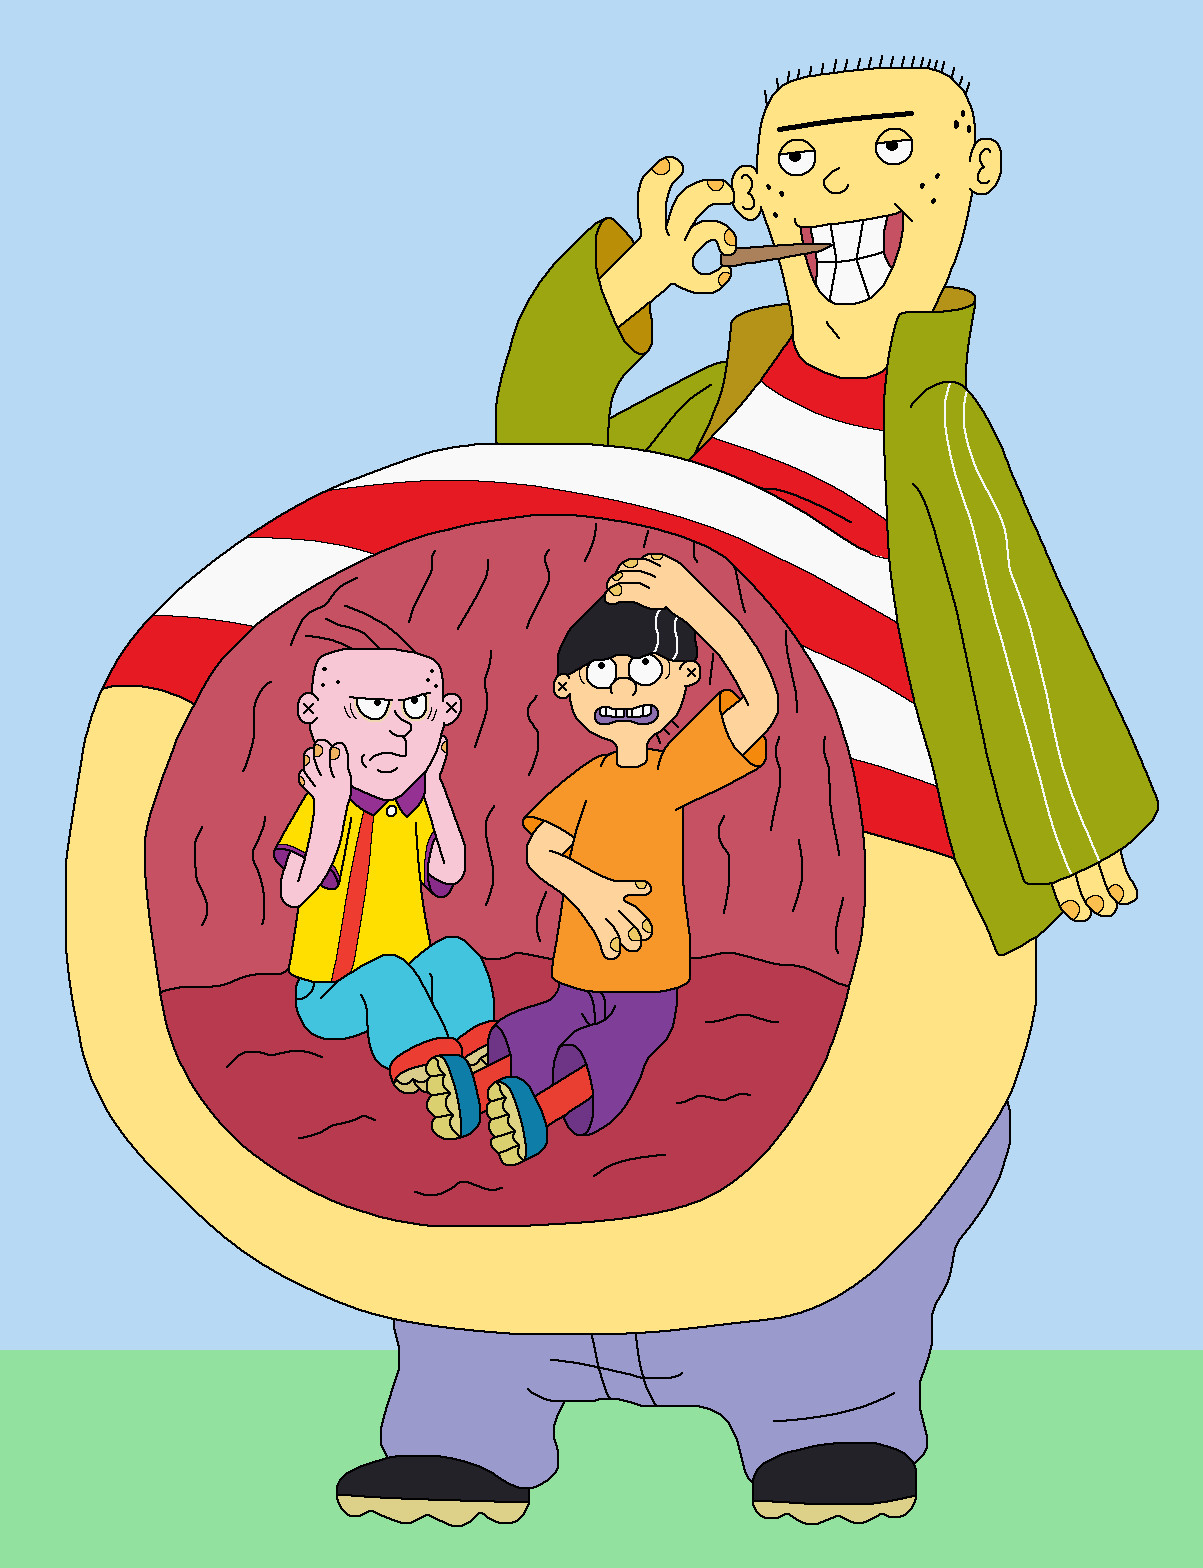 Ed swallow Edd and Eddy by MCsaurus on DeviantArt from images-wixmp-ed30a86...